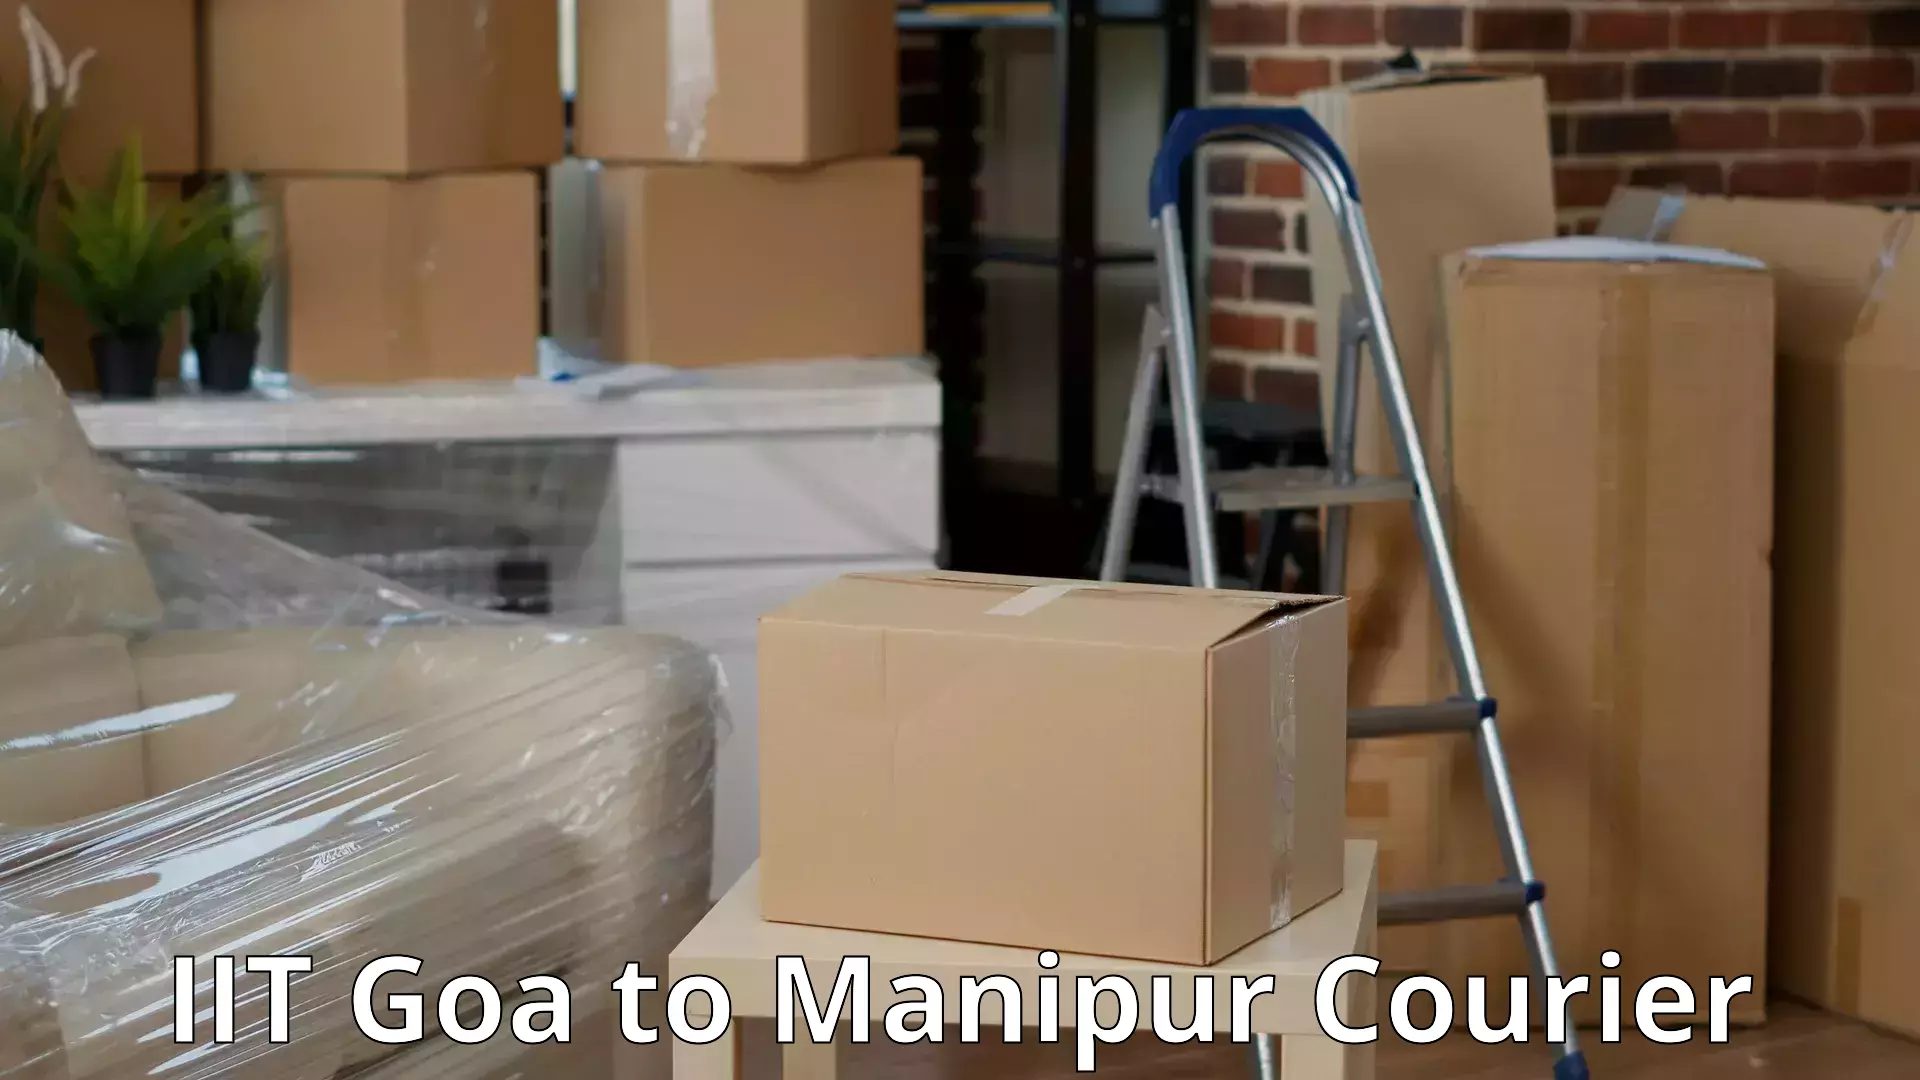 Household goods transport service IIT Goa to Manipur